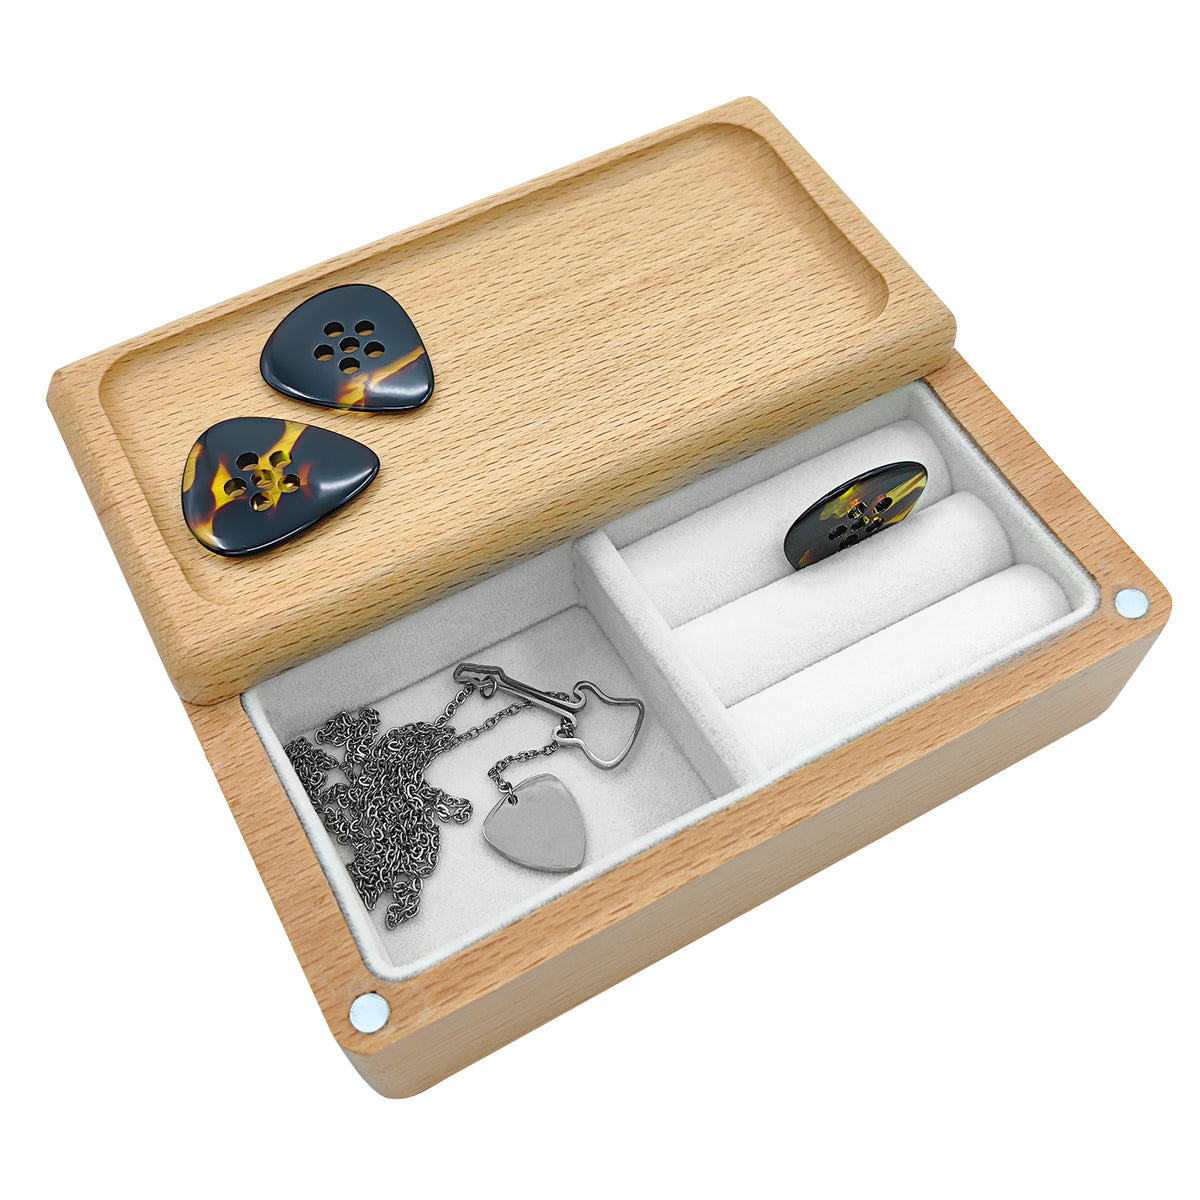 Musiin Luxury Wood Guitar Pick Holder - Sturdy Guitar Pick Storage Box Display Case Jewelry Box for Men Women Teens Adults - Ideal for Guitar Picks Accessories(Cuboid Style)